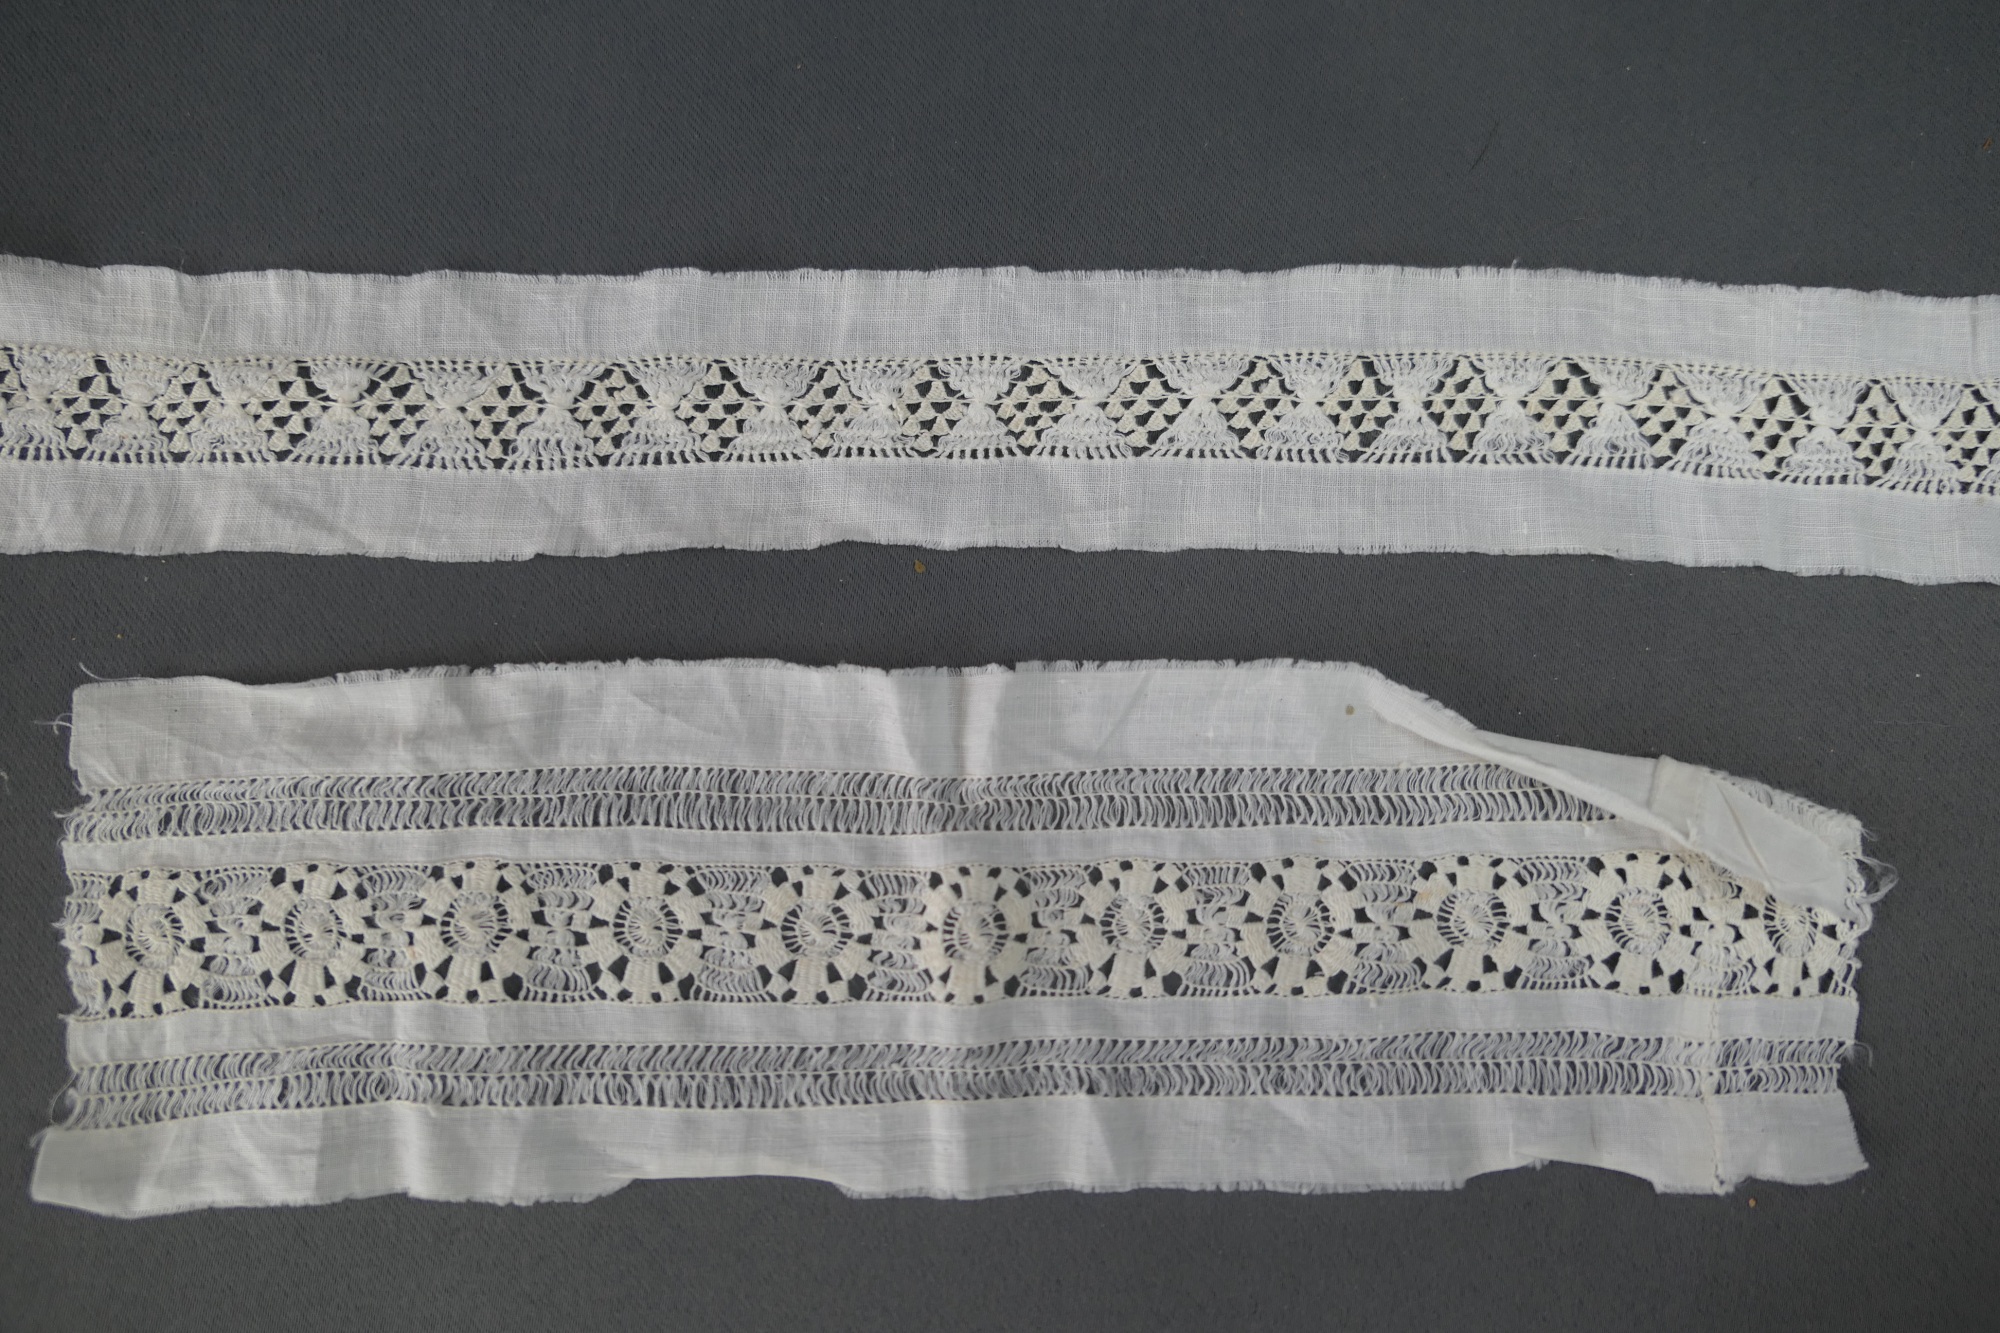 antique Victorian era cotton lace trim or insertion, turn of the